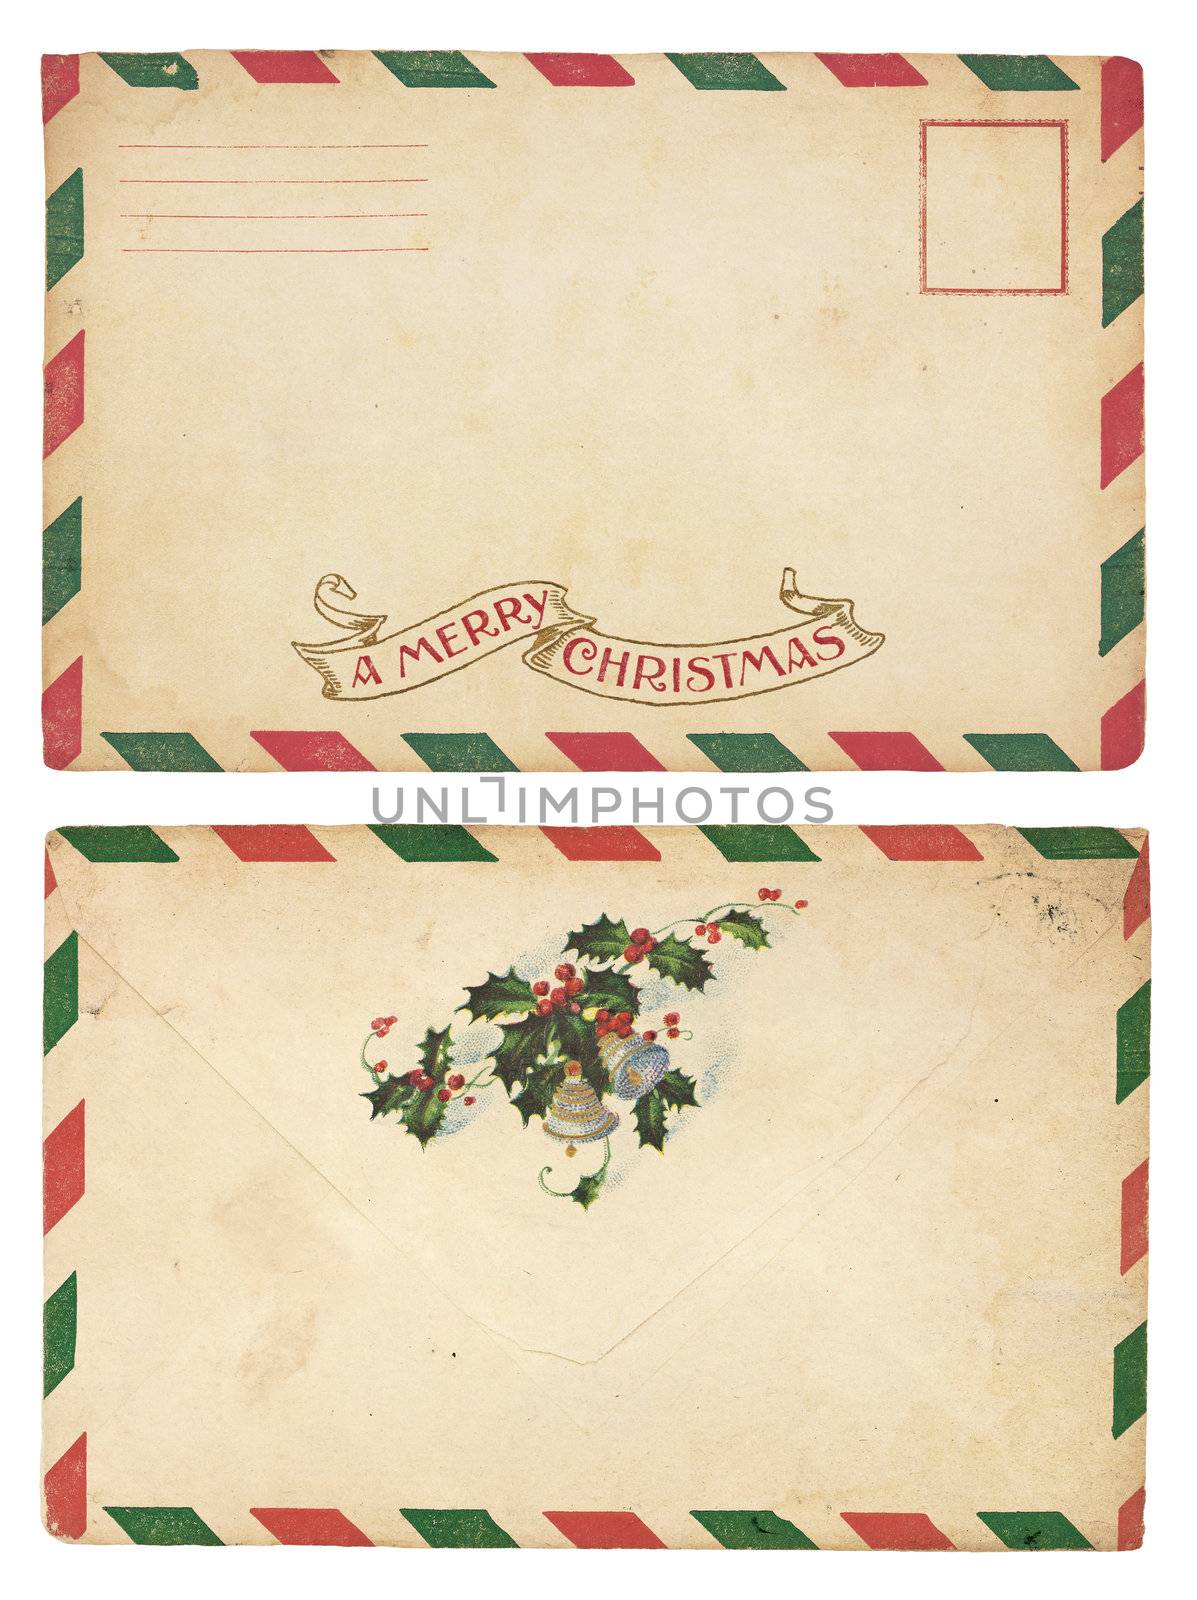 The front and back of an aging Christmas envelope with red and green striped border. Isolated on white with clipping path.